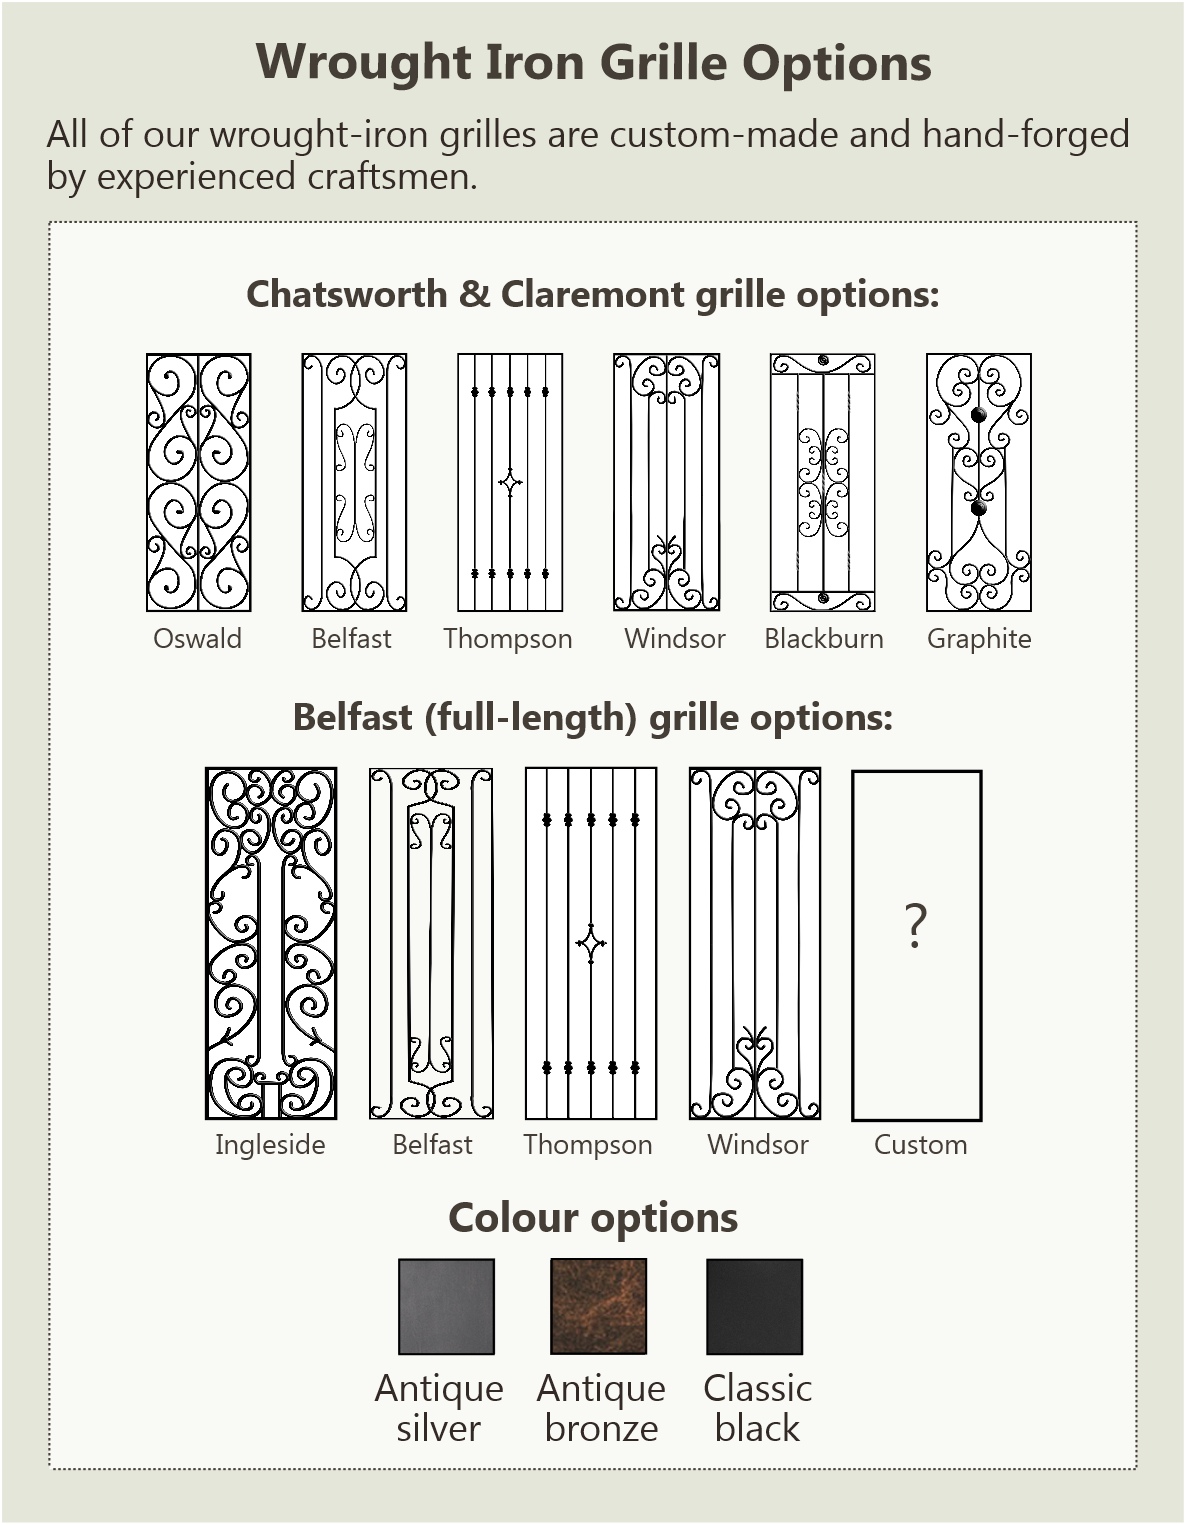 Wrought IronGrille Design Options